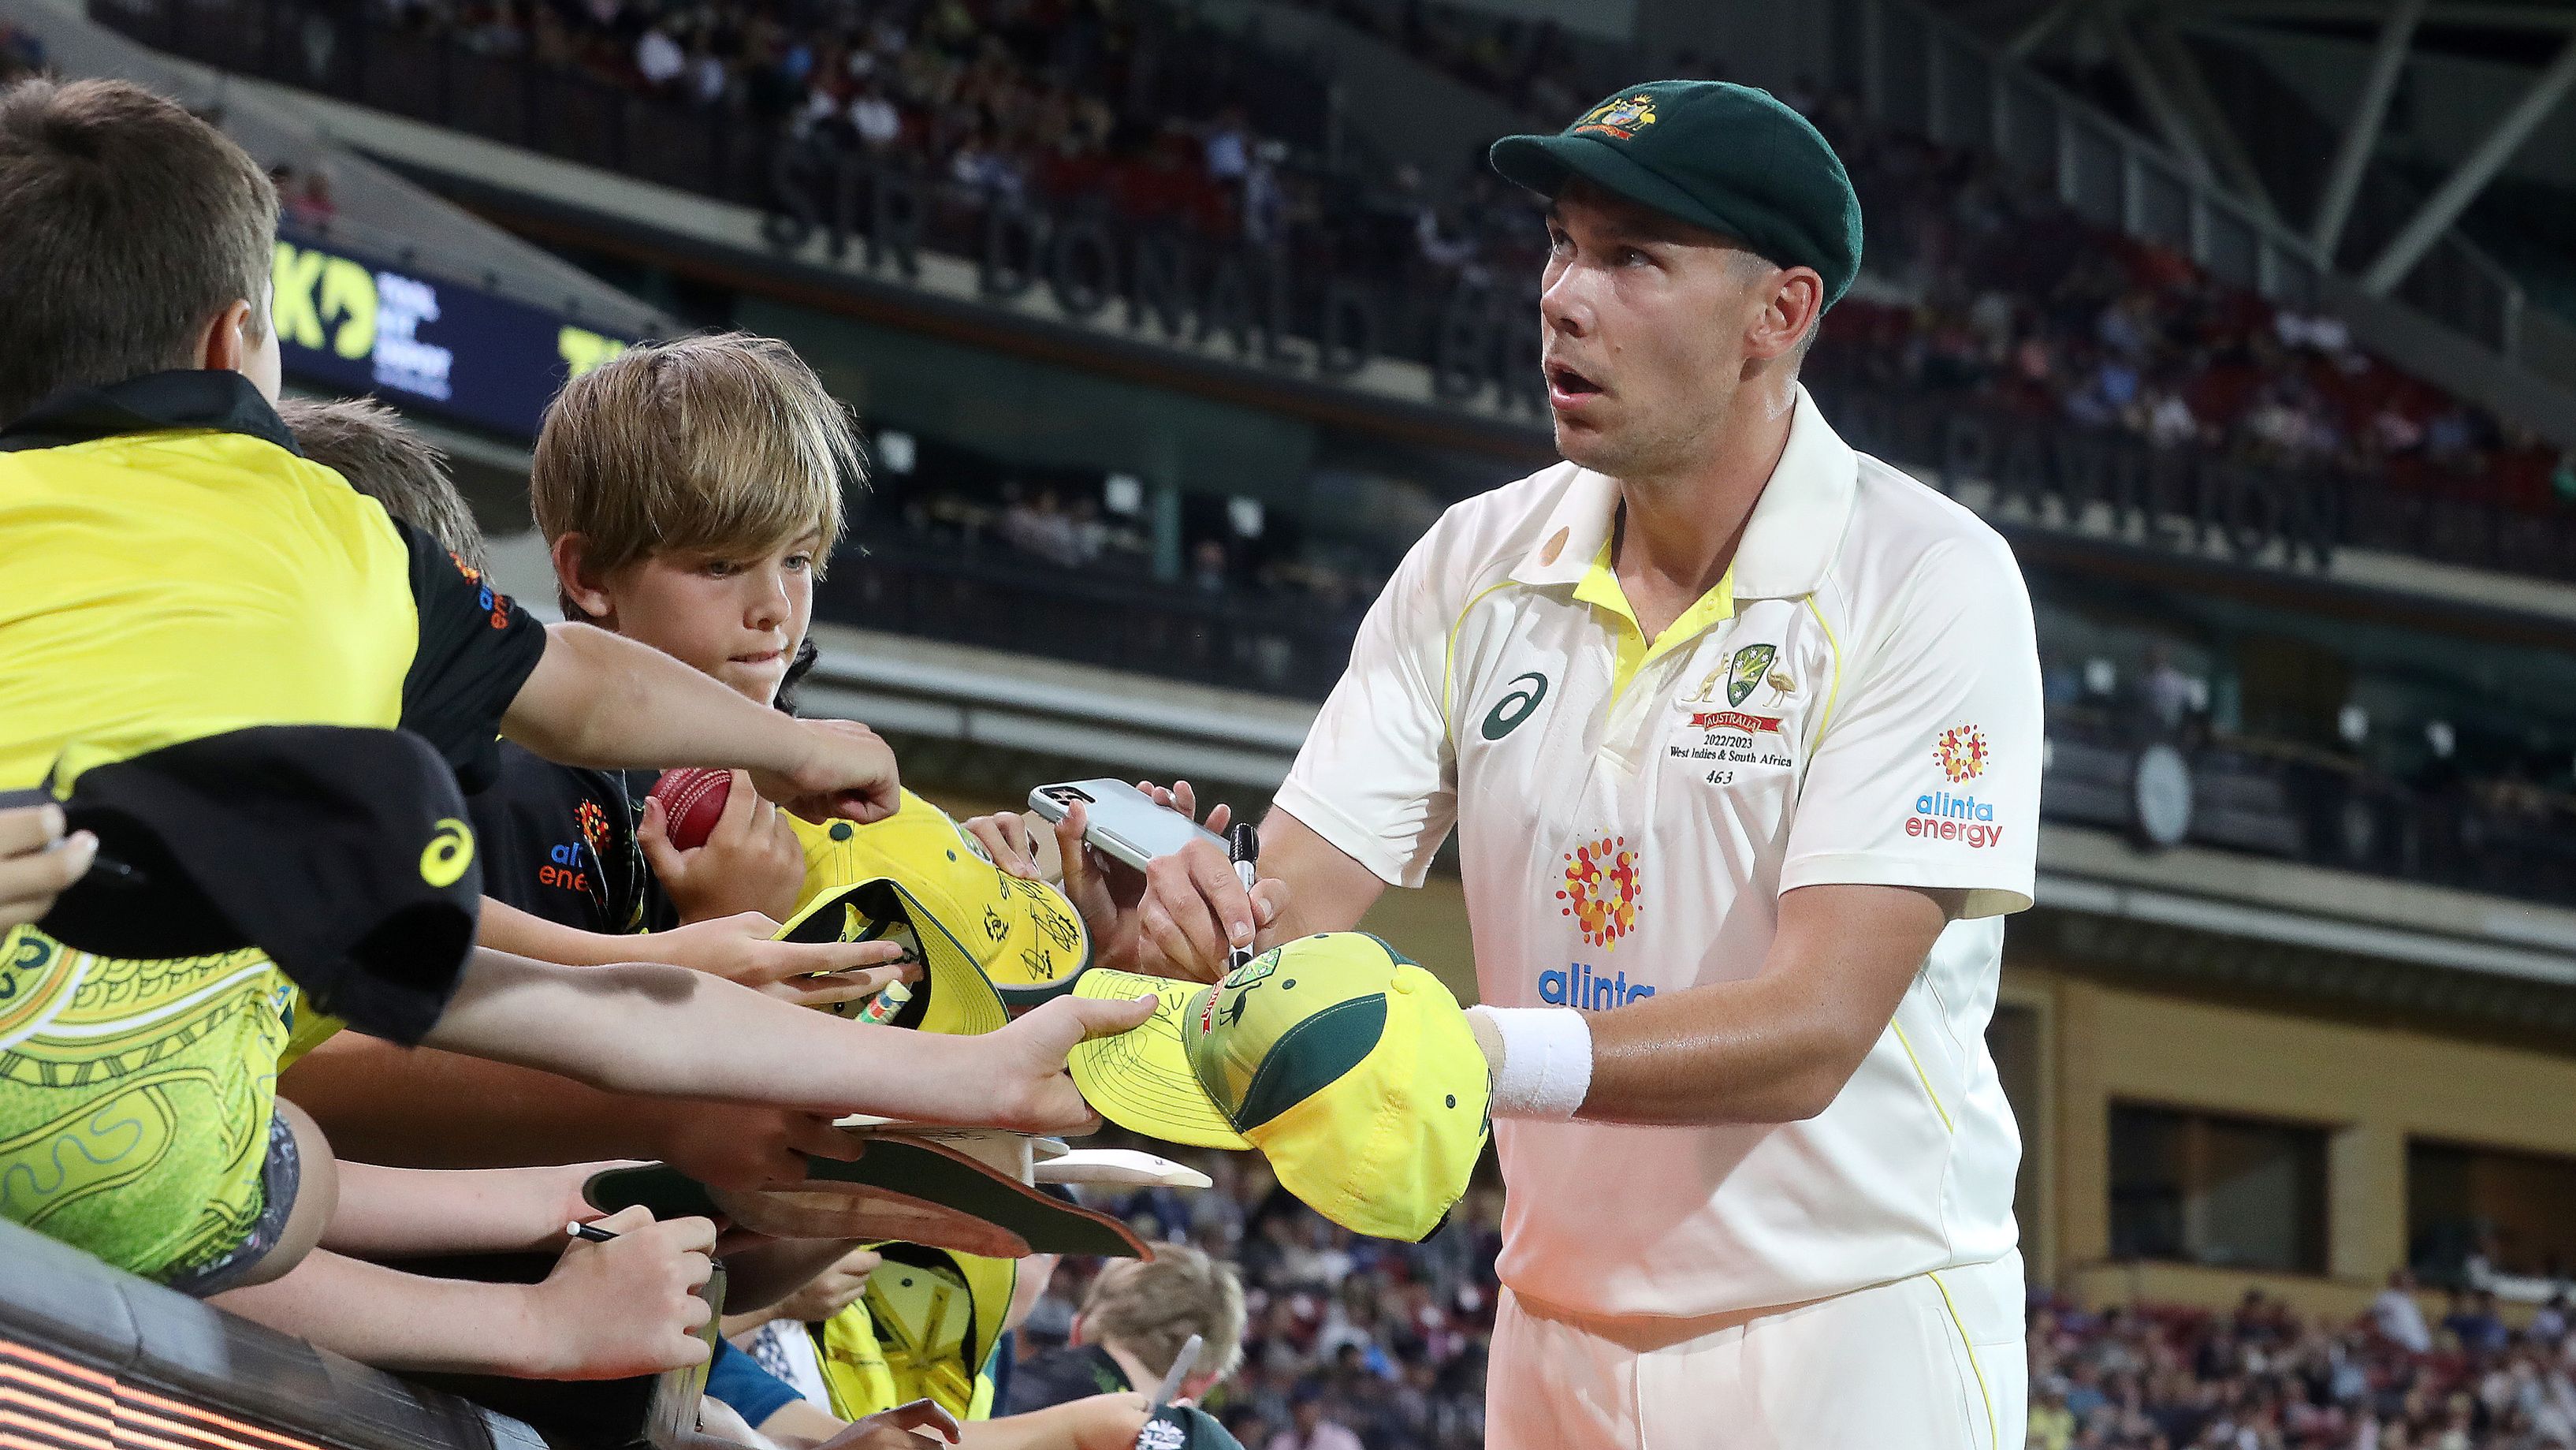 Scott Boland of Australia signs autographs during day three of the Second Test Match in the series between Australia and the West Indies at Adelaide Oval on December 10, 2022 in Adelaide, Australia. (Photo by Sarah Reed - CA/Cricket Australia via Getty Images)